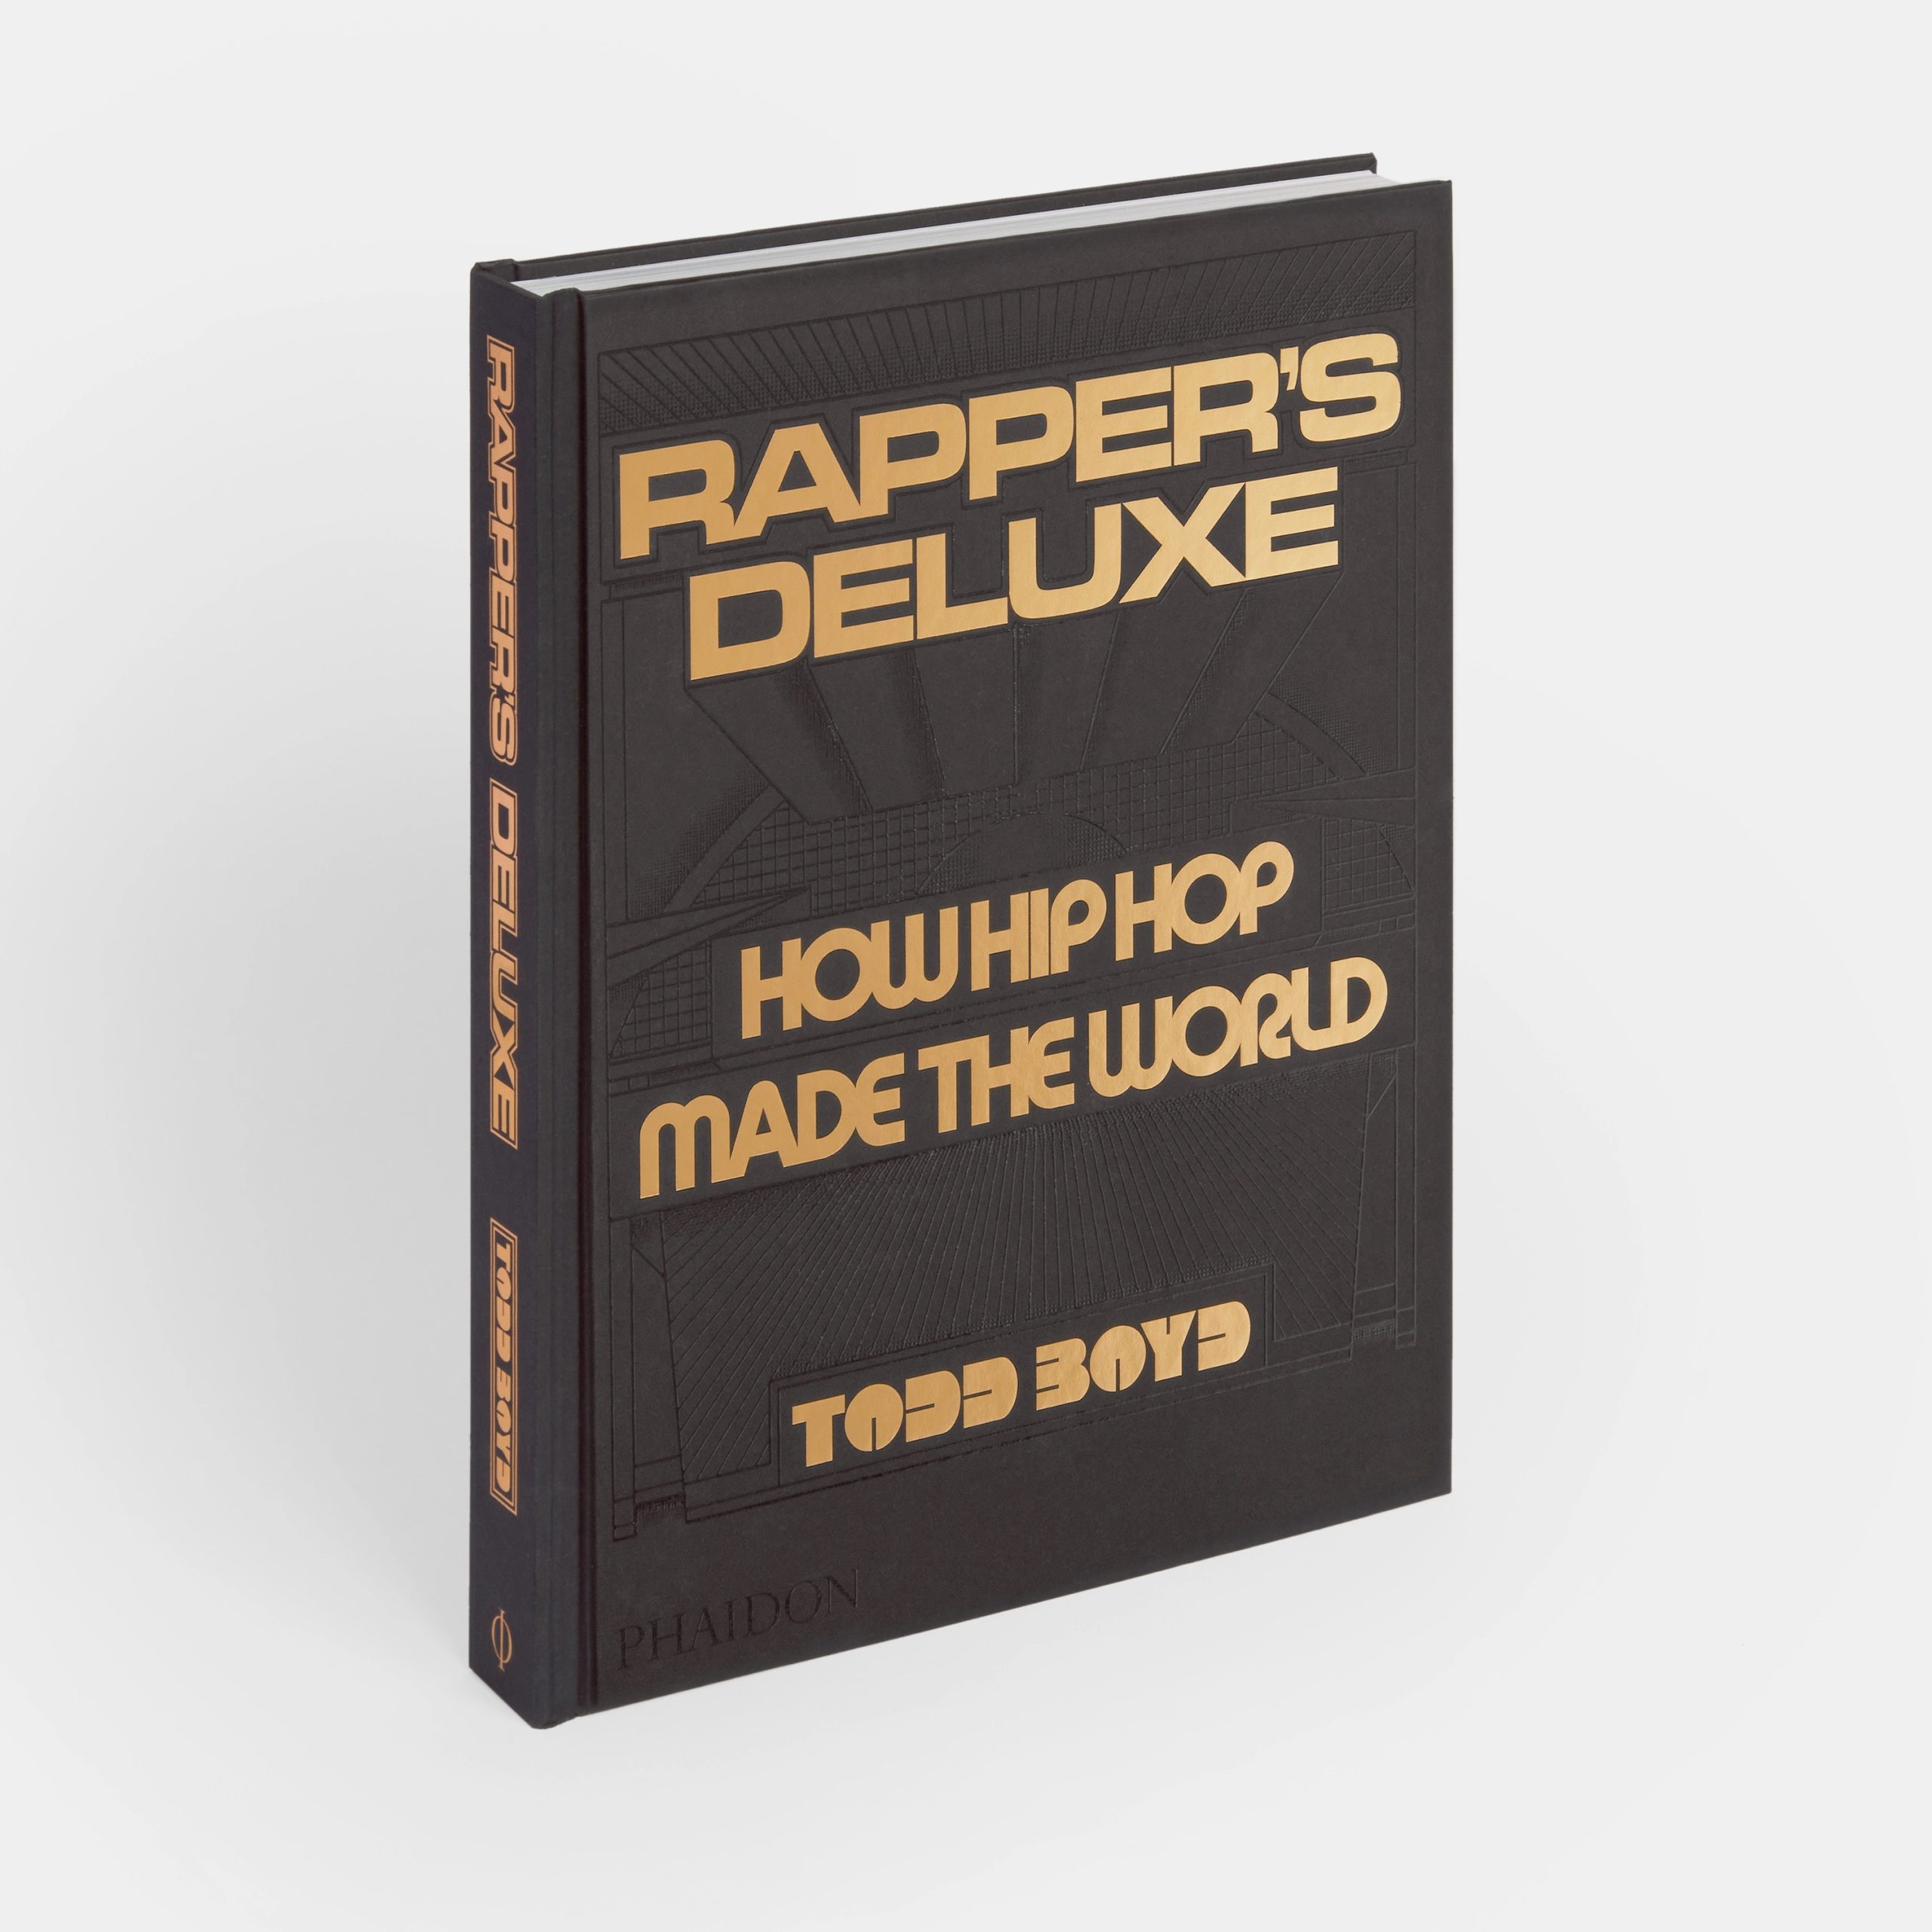 Rapper’s Deluxe: How Hip Hop Made The World #hiphop